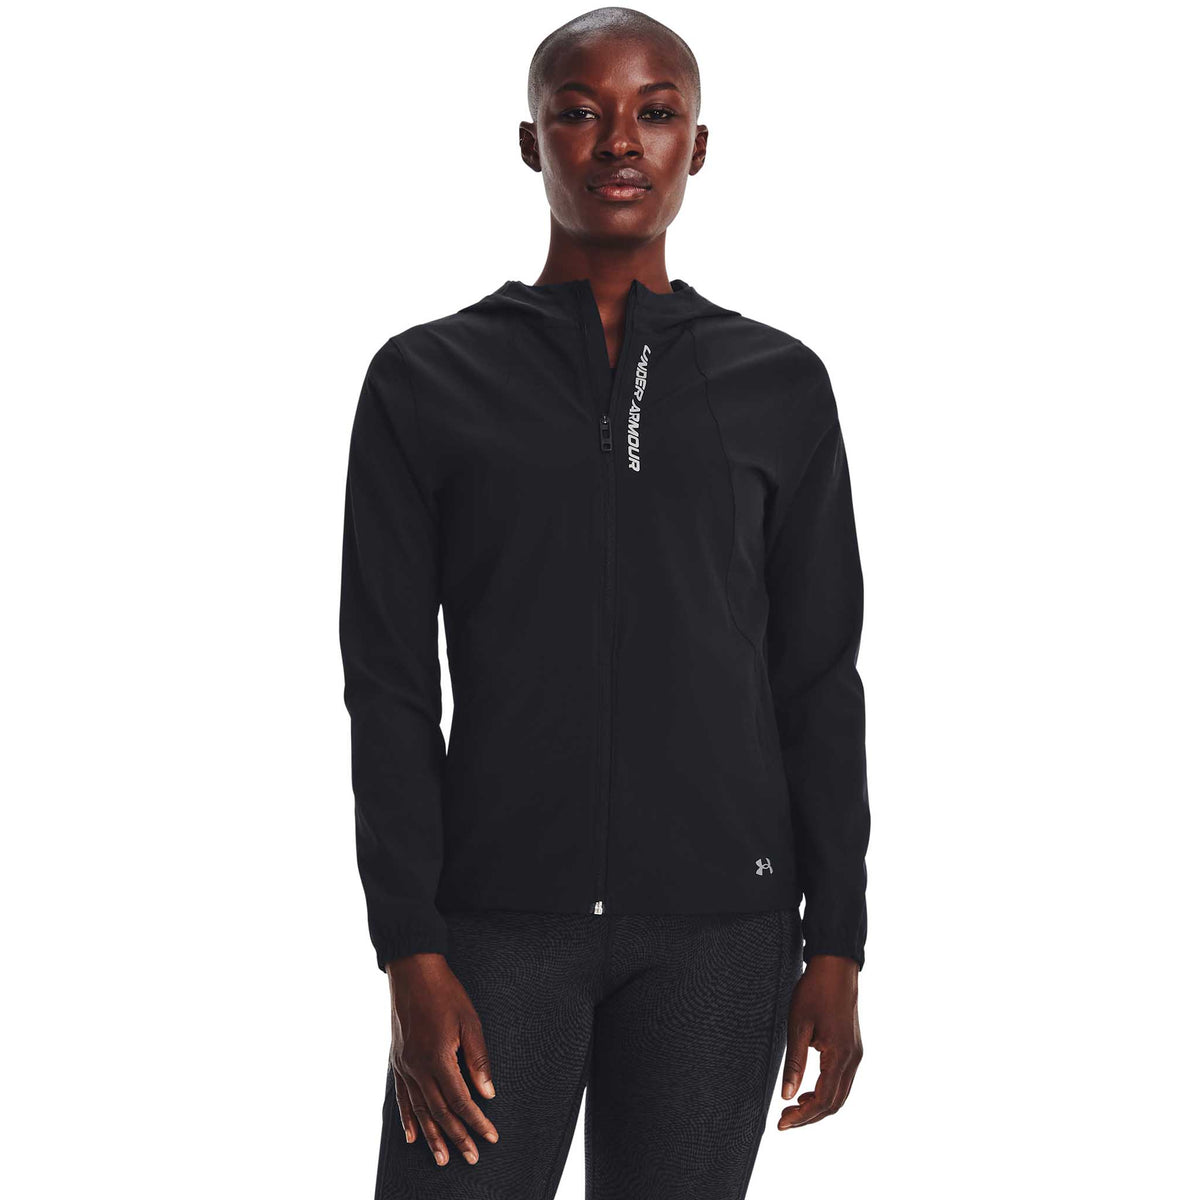 Under Armour Outrun The Storm running jacket for women – Soccer